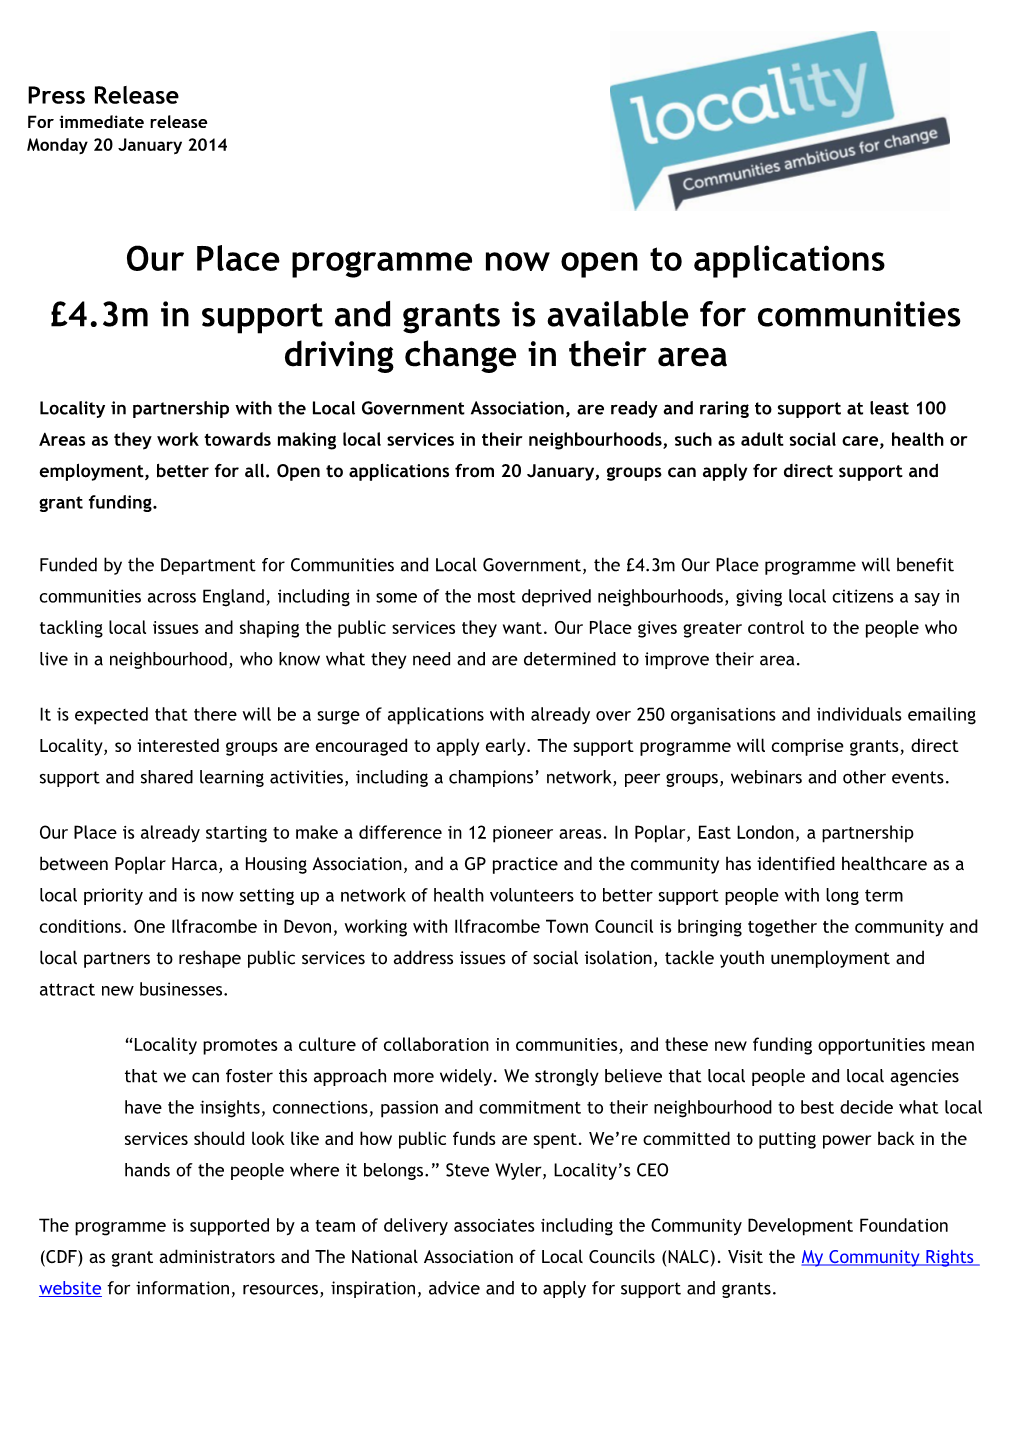 Our Place Programme Now Open to Applications 4.3M in Support and Grants Is Available For